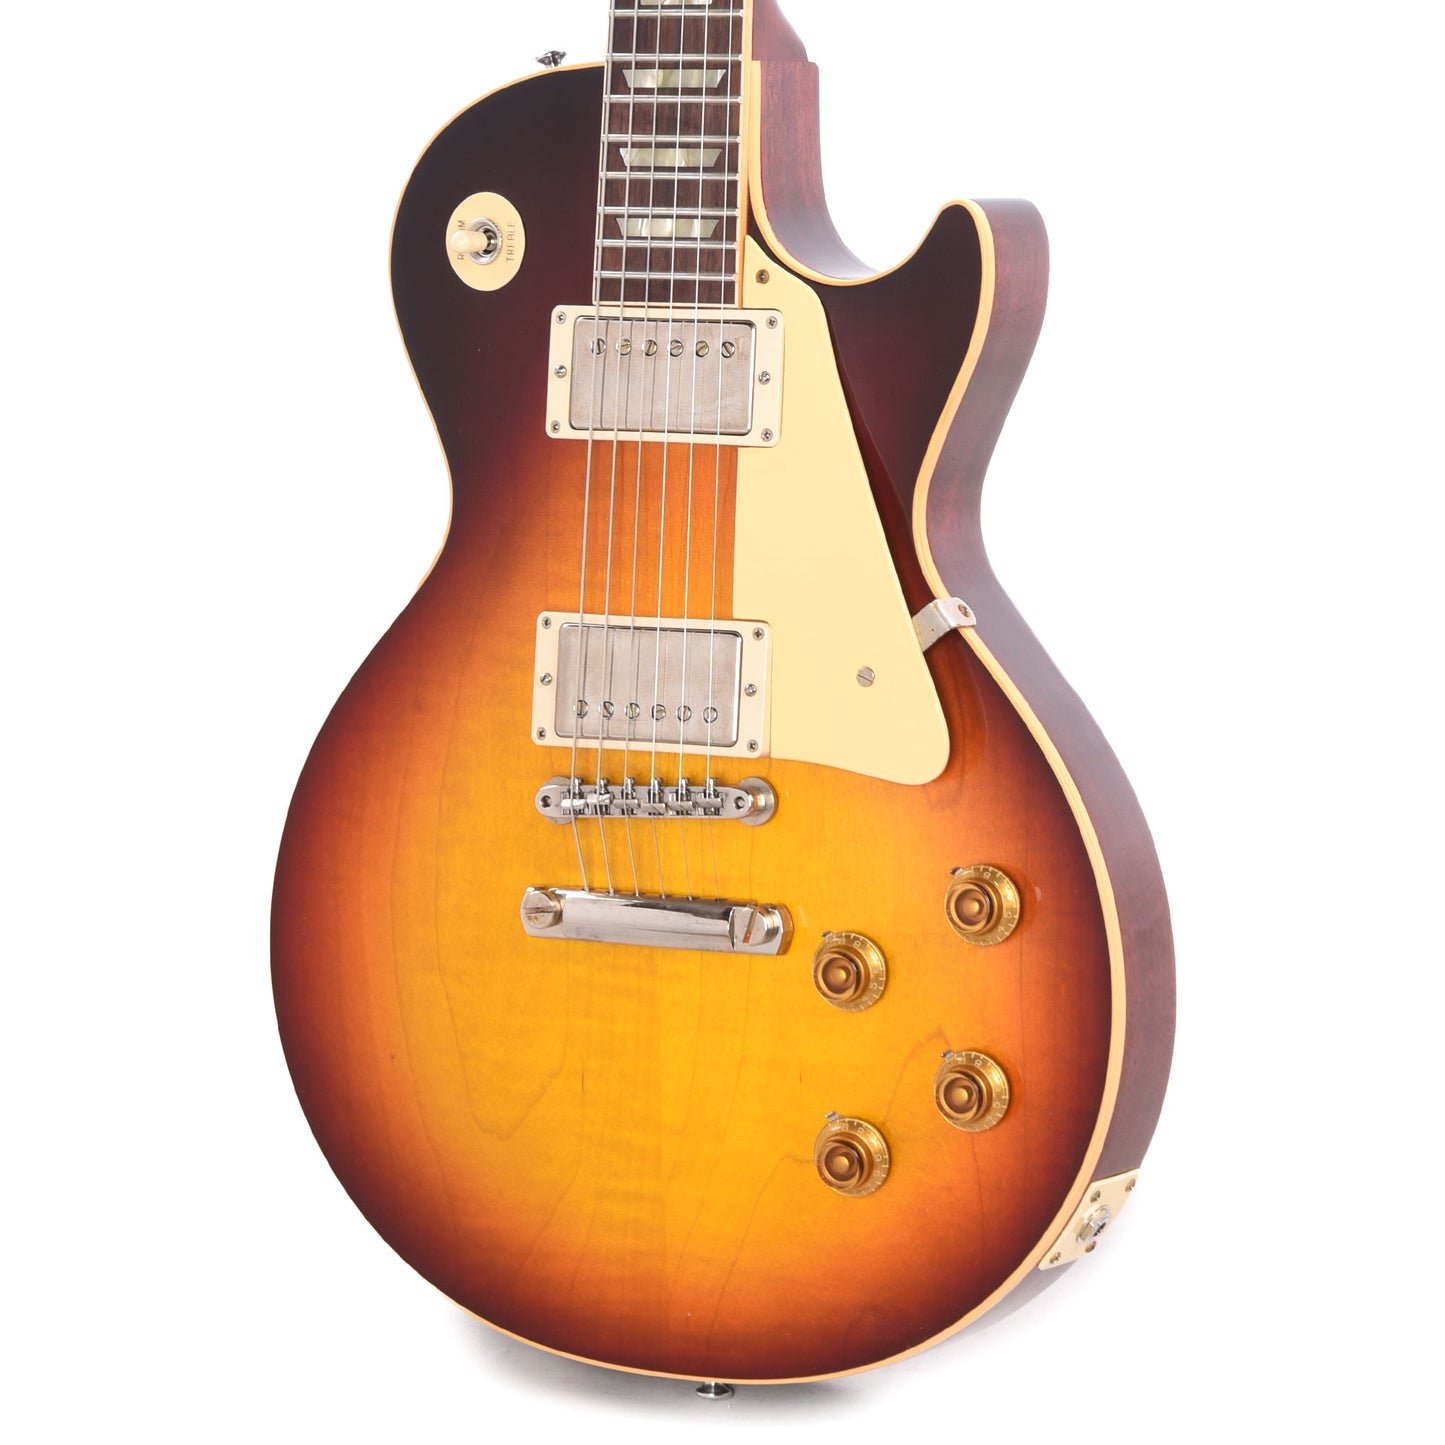 Gibson Custom Shop 1958 Les Paul Standard "CME Spec" Southern Fade VOS w/60 V2 Neck Profile